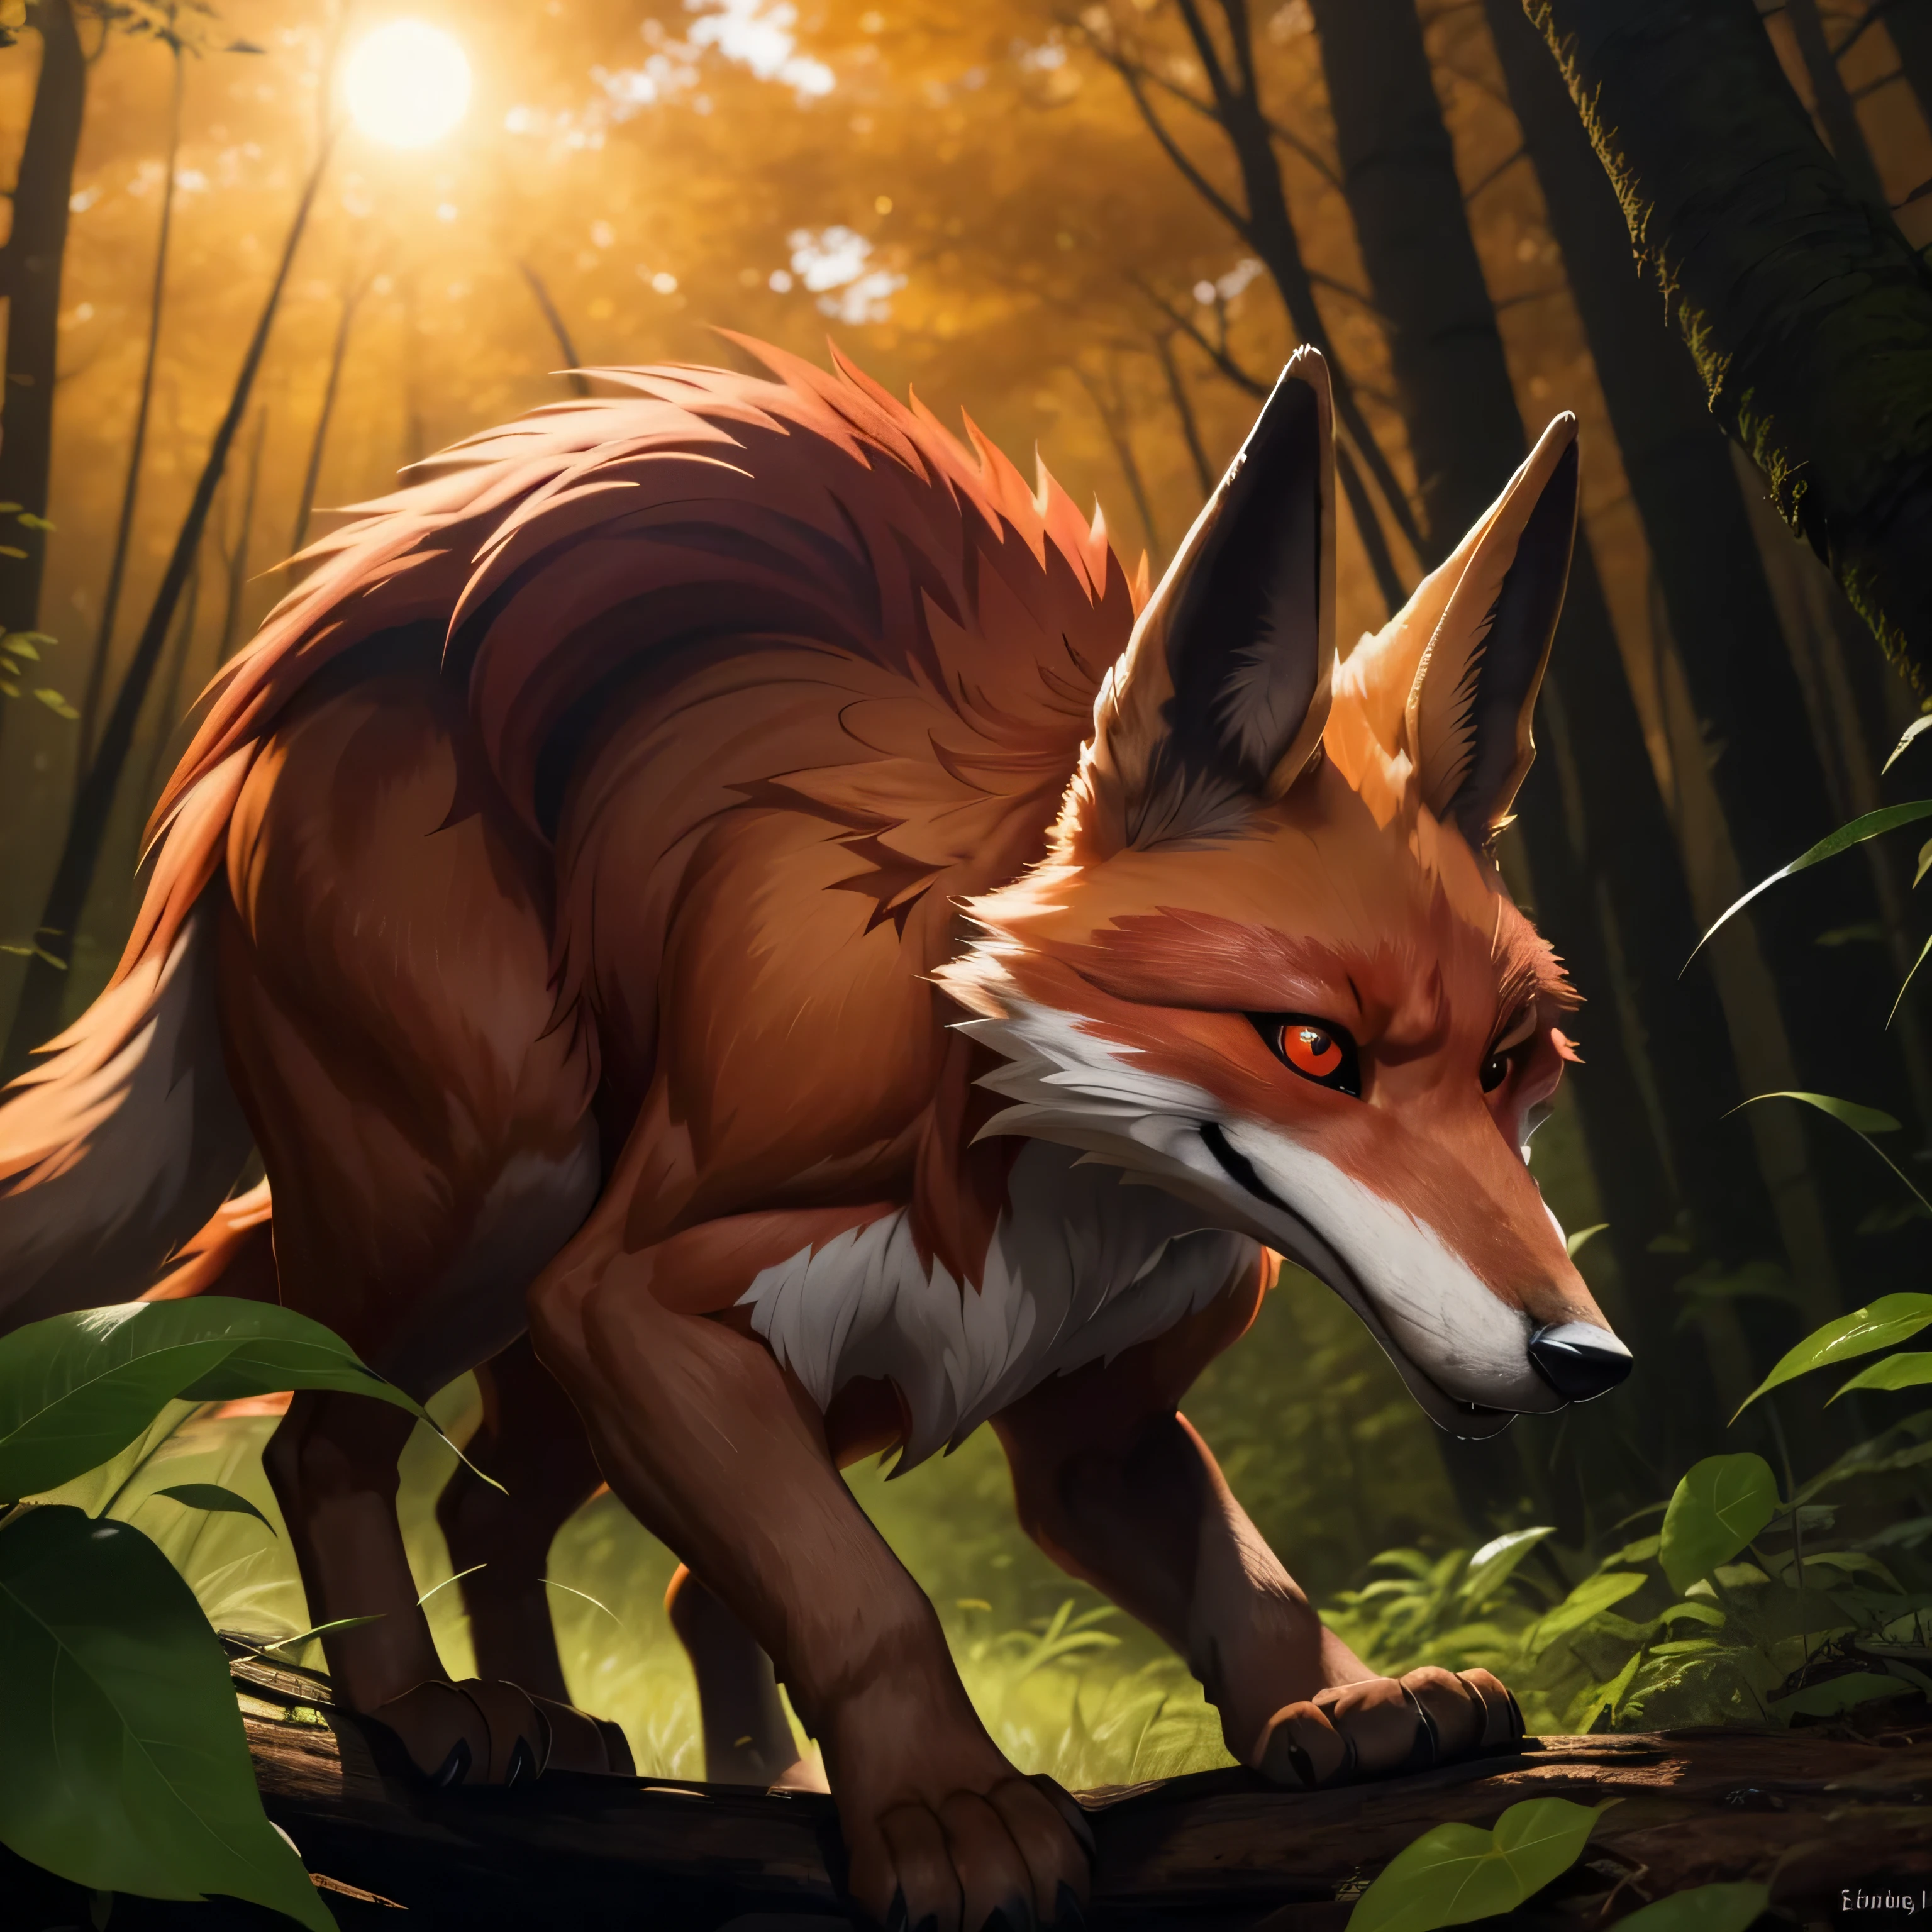 Un zorro con partes del pelaje morados, (A fox with red-colored fur parts),

This fox's sleek and agile body is adorned with patches of vibrant red fur, blending seamlessly with its overall reddish-brown coat. The sun sets behind it, casting long shadows across the forest floor, leaving the area bathed in a soft orange glow. The fox tilts its head, its round face framed by pointed ears and captivating amber eyes. Its bright, curved snout twitches slightly, sensing the scent of prey nearby. The forest comes alive with the sounds of crickets and rustling leaves, as this elegant and